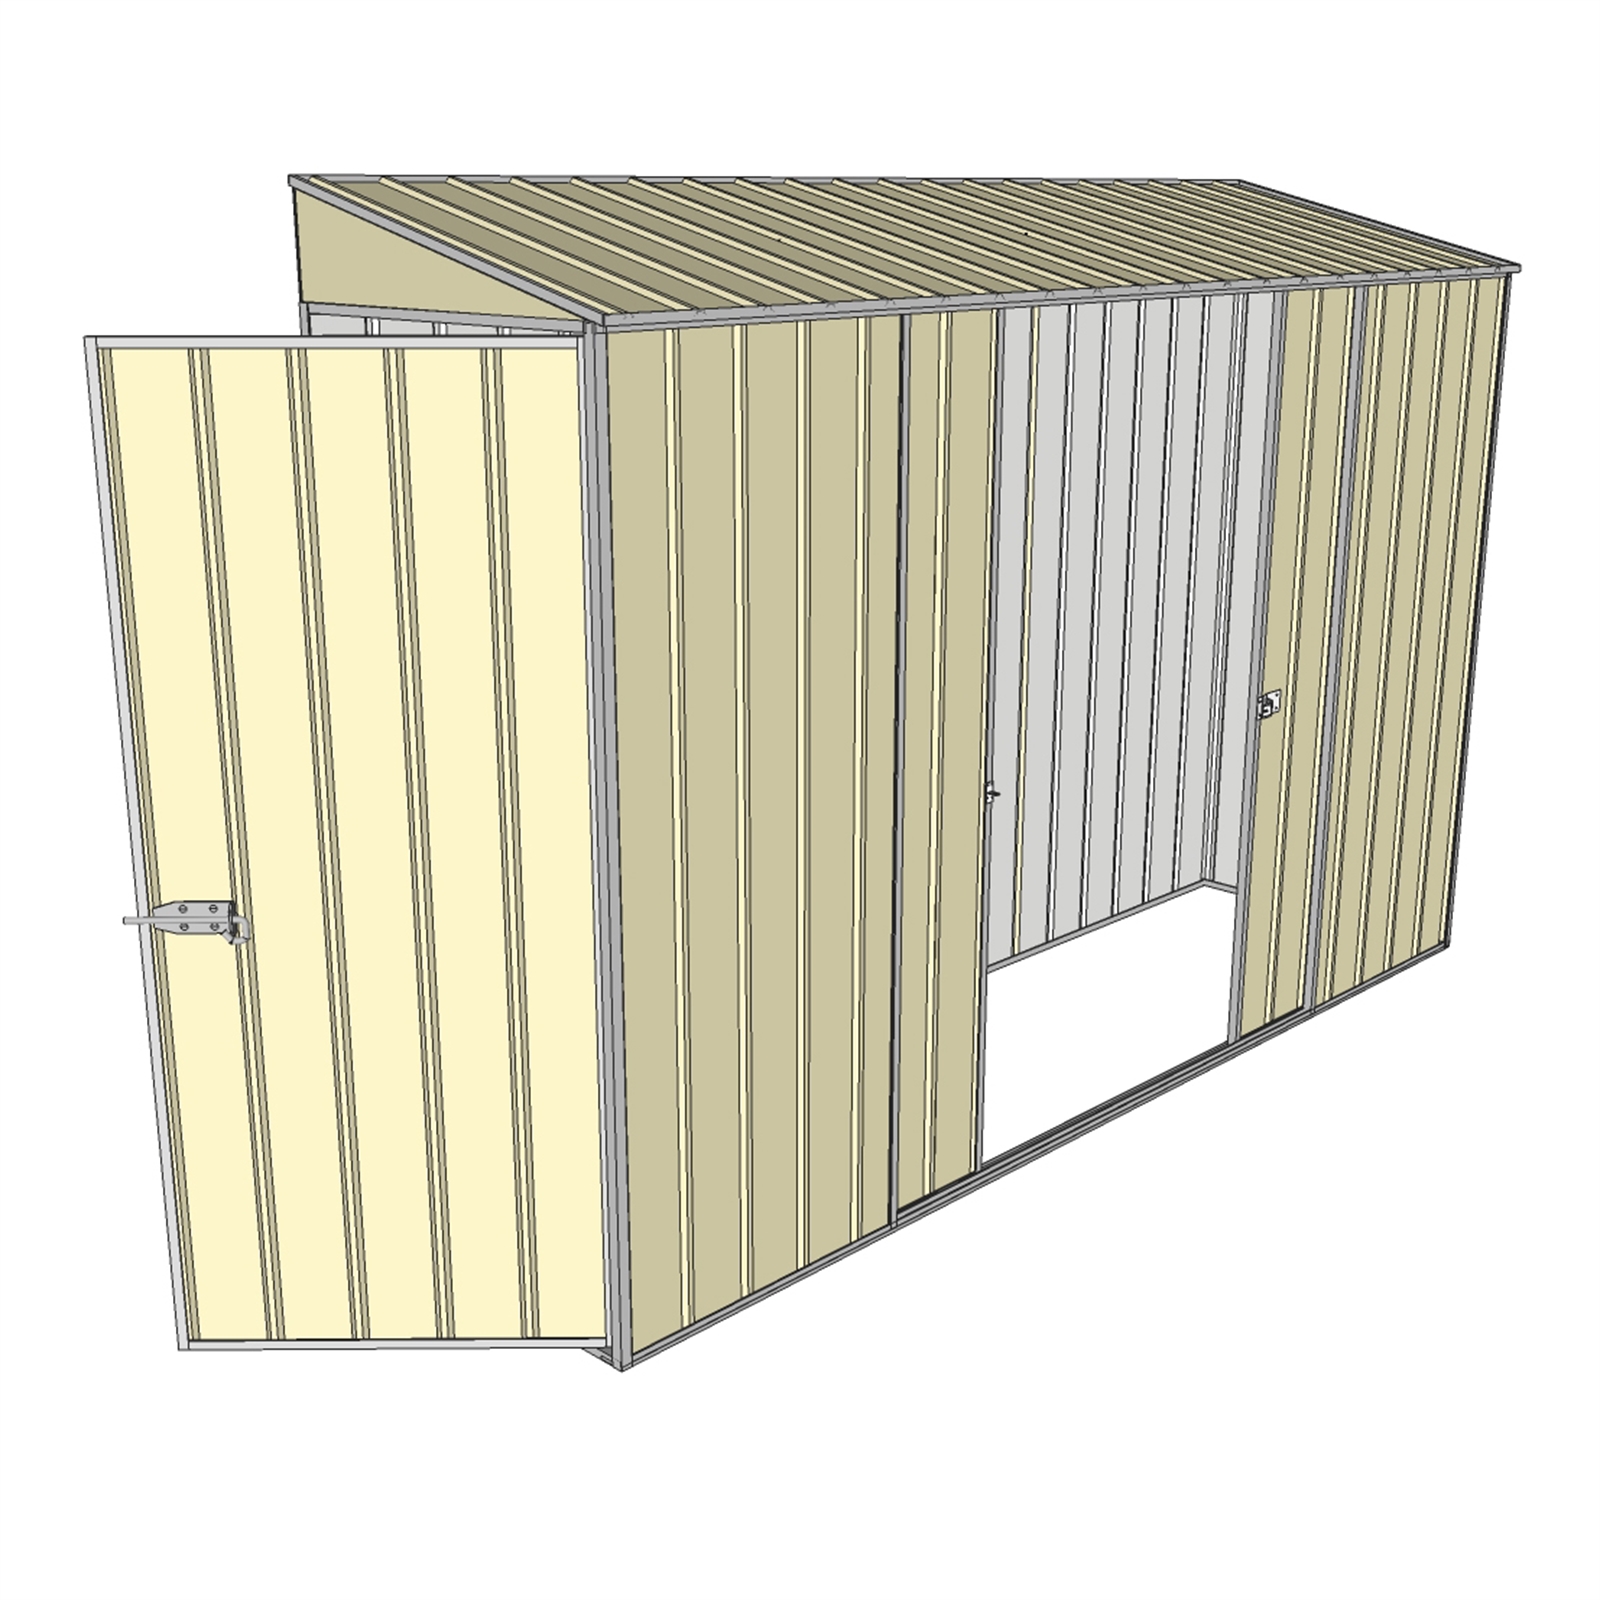 Build-a-Shed 3.0 x 2.0 x 0.8m Cream Double Sliding and Single Hinge Door Narrow Skillion Shed